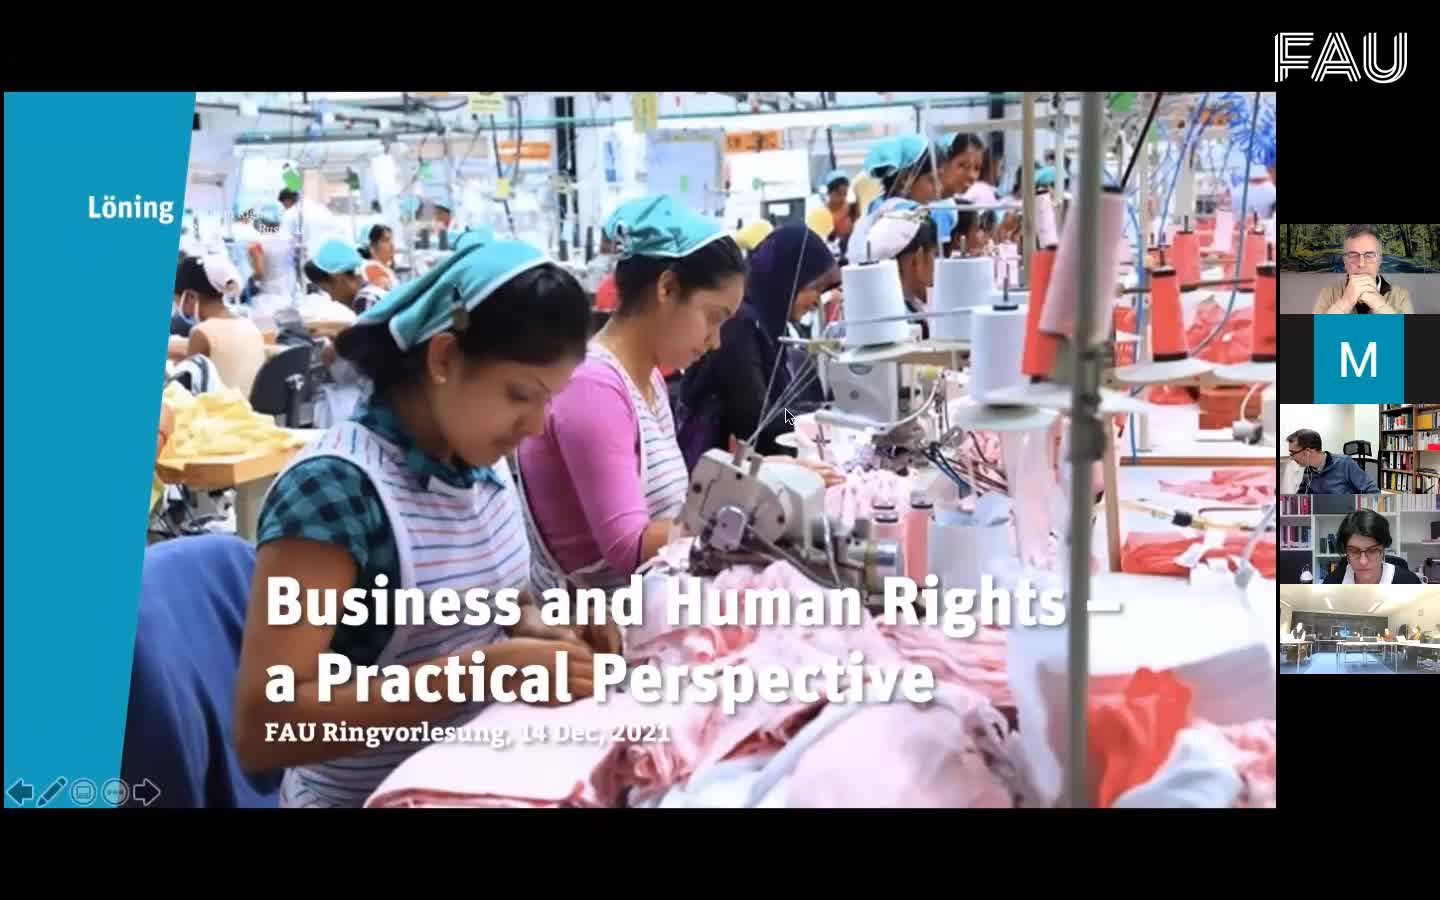 Markus Löning: "Business and Human Rights - A practical perspective" preview image